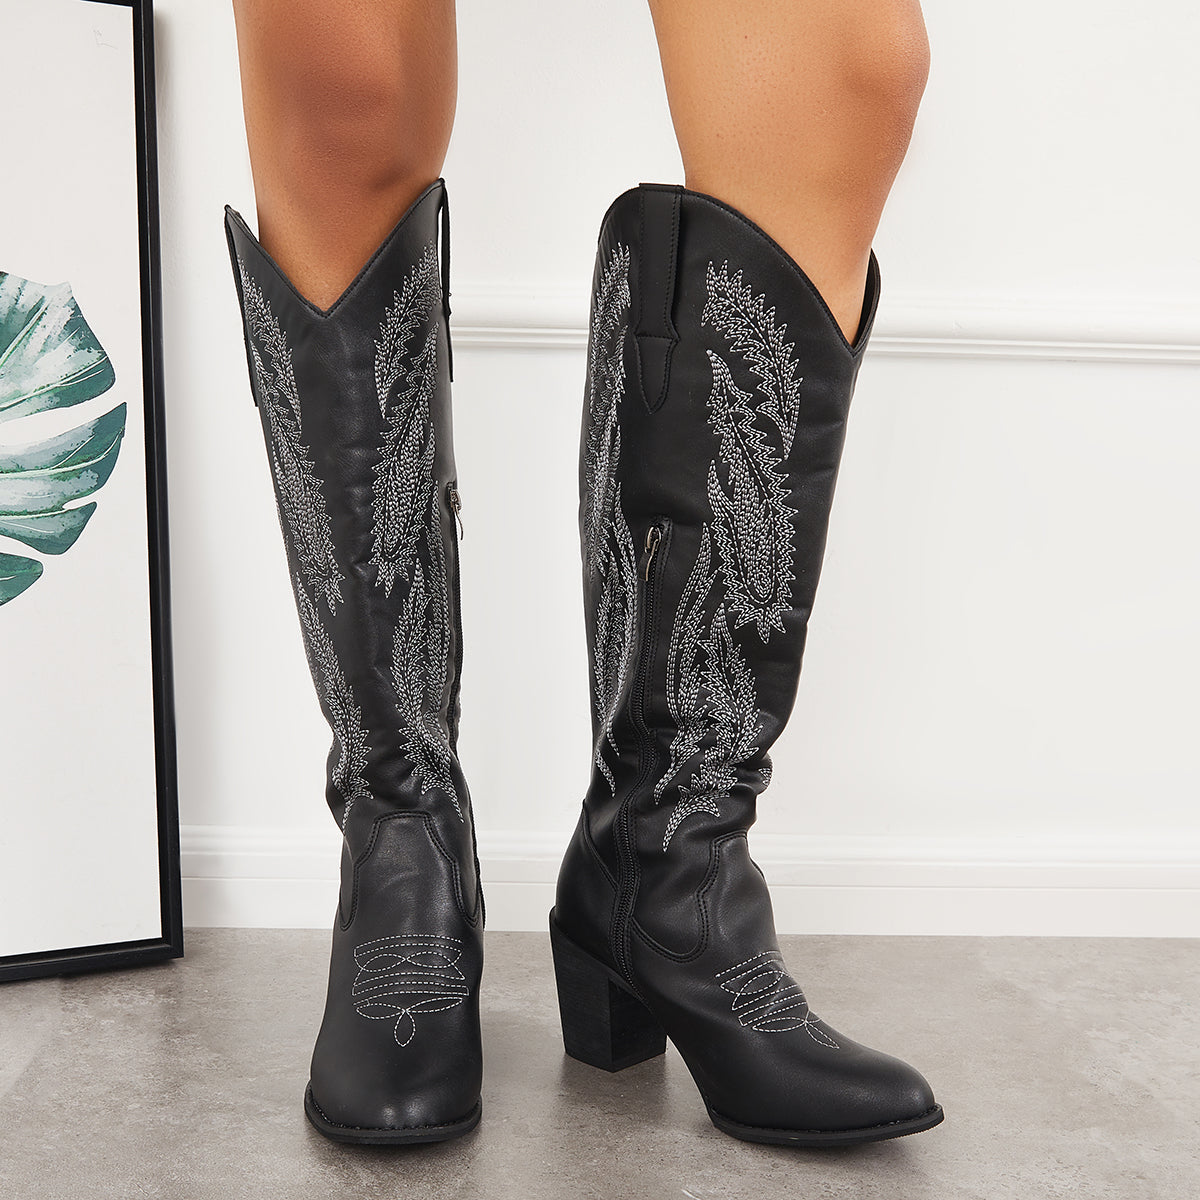 Embroidered Western Cowboy Boots Chunky Heel Knee High Riding Boots ...